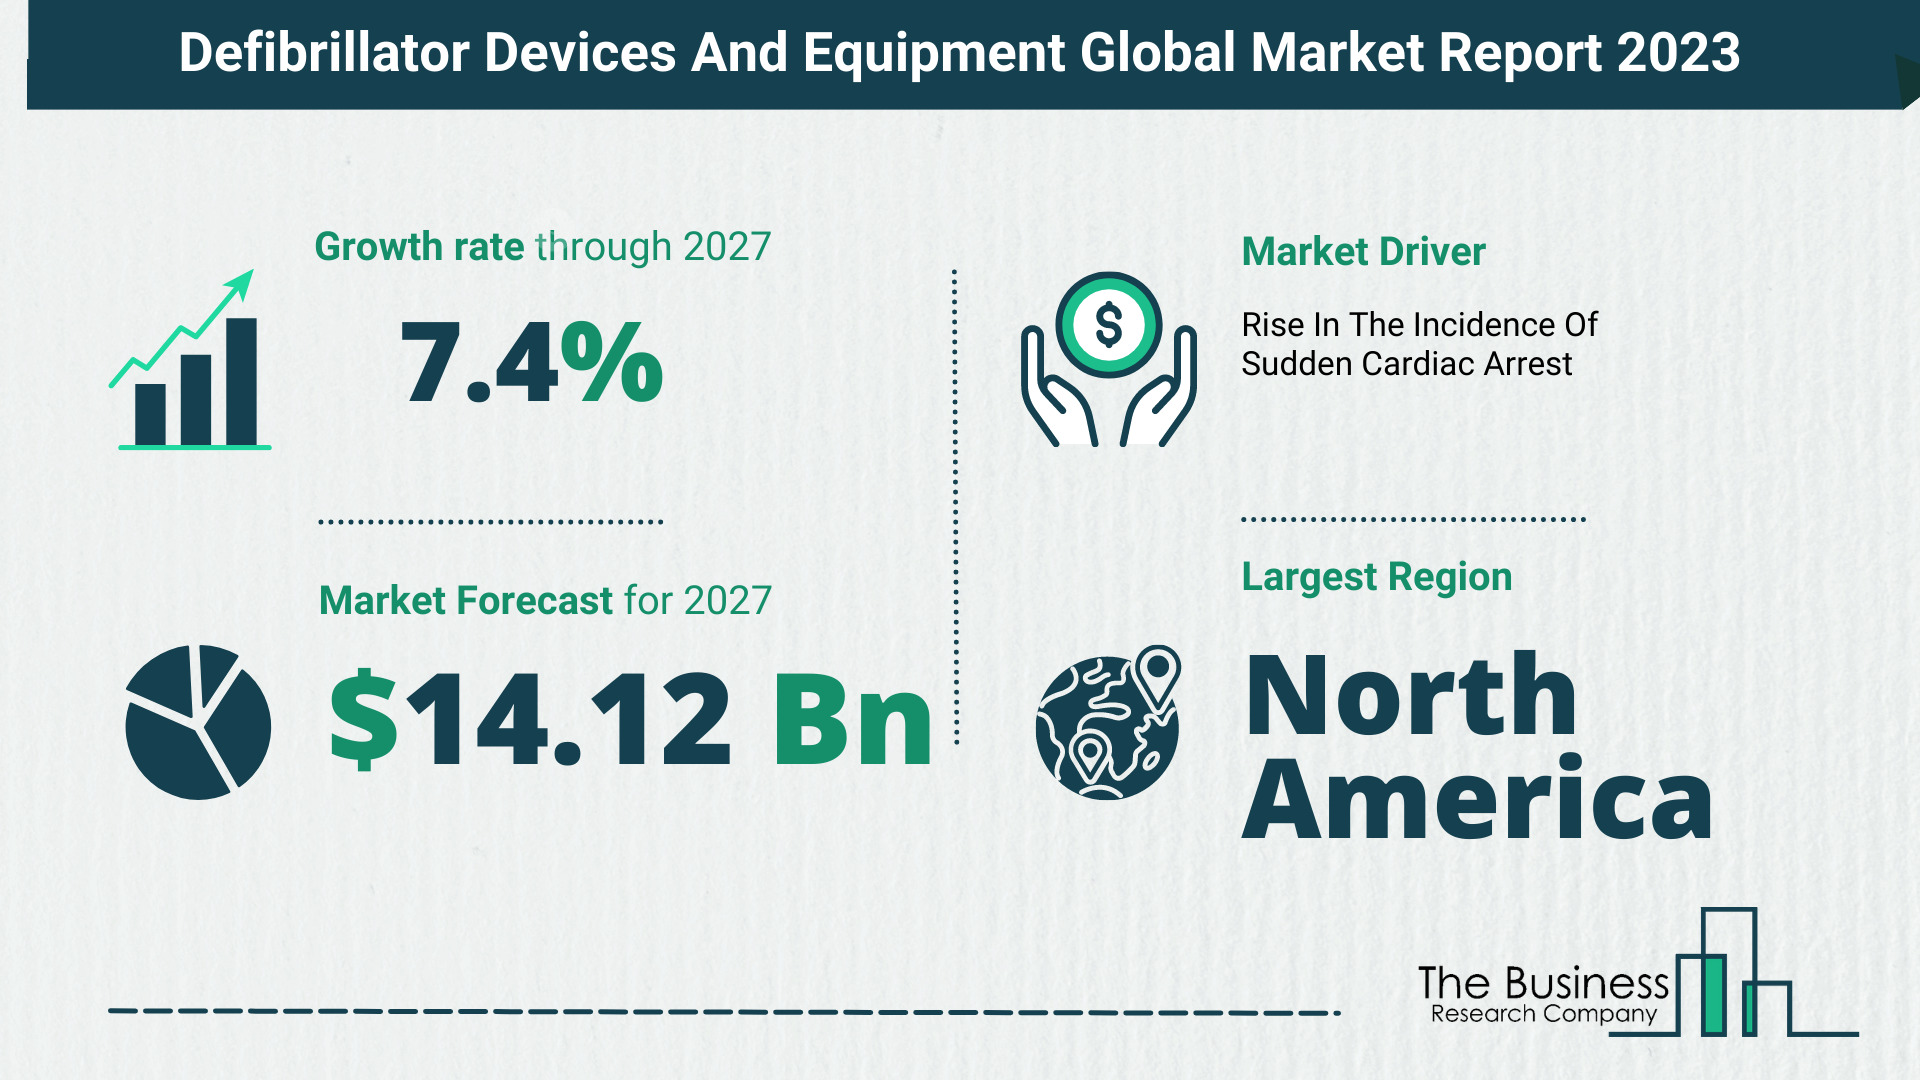 Defibrillator Devices And Equipment Market Size, Share, And Growth Rate Analysis 2023